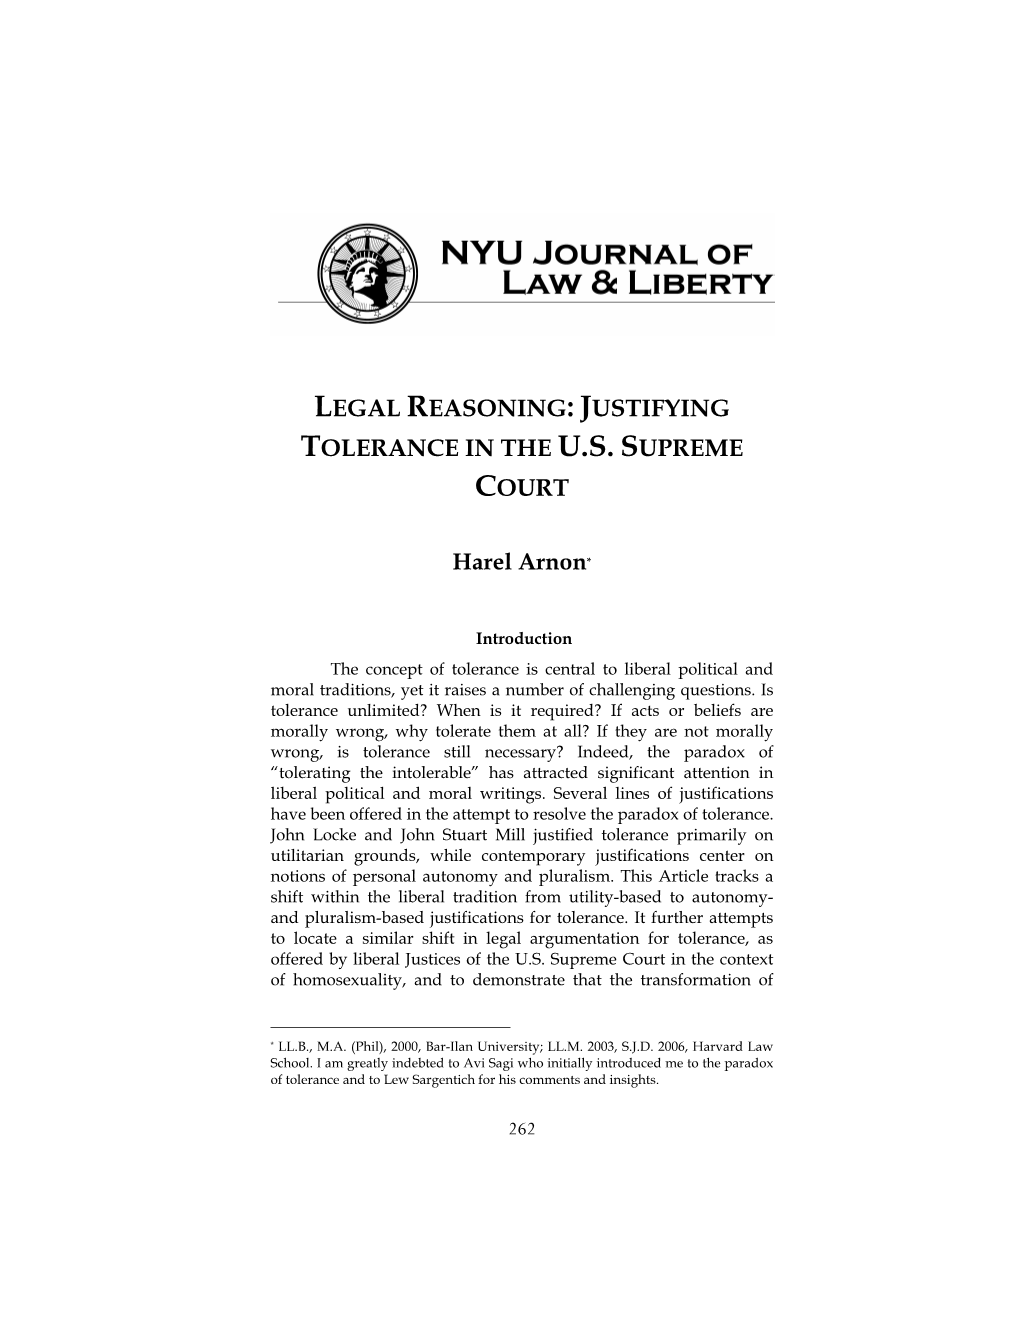 Legal Reasoning: Justifying Tolerance in the U.S. Supreme Court